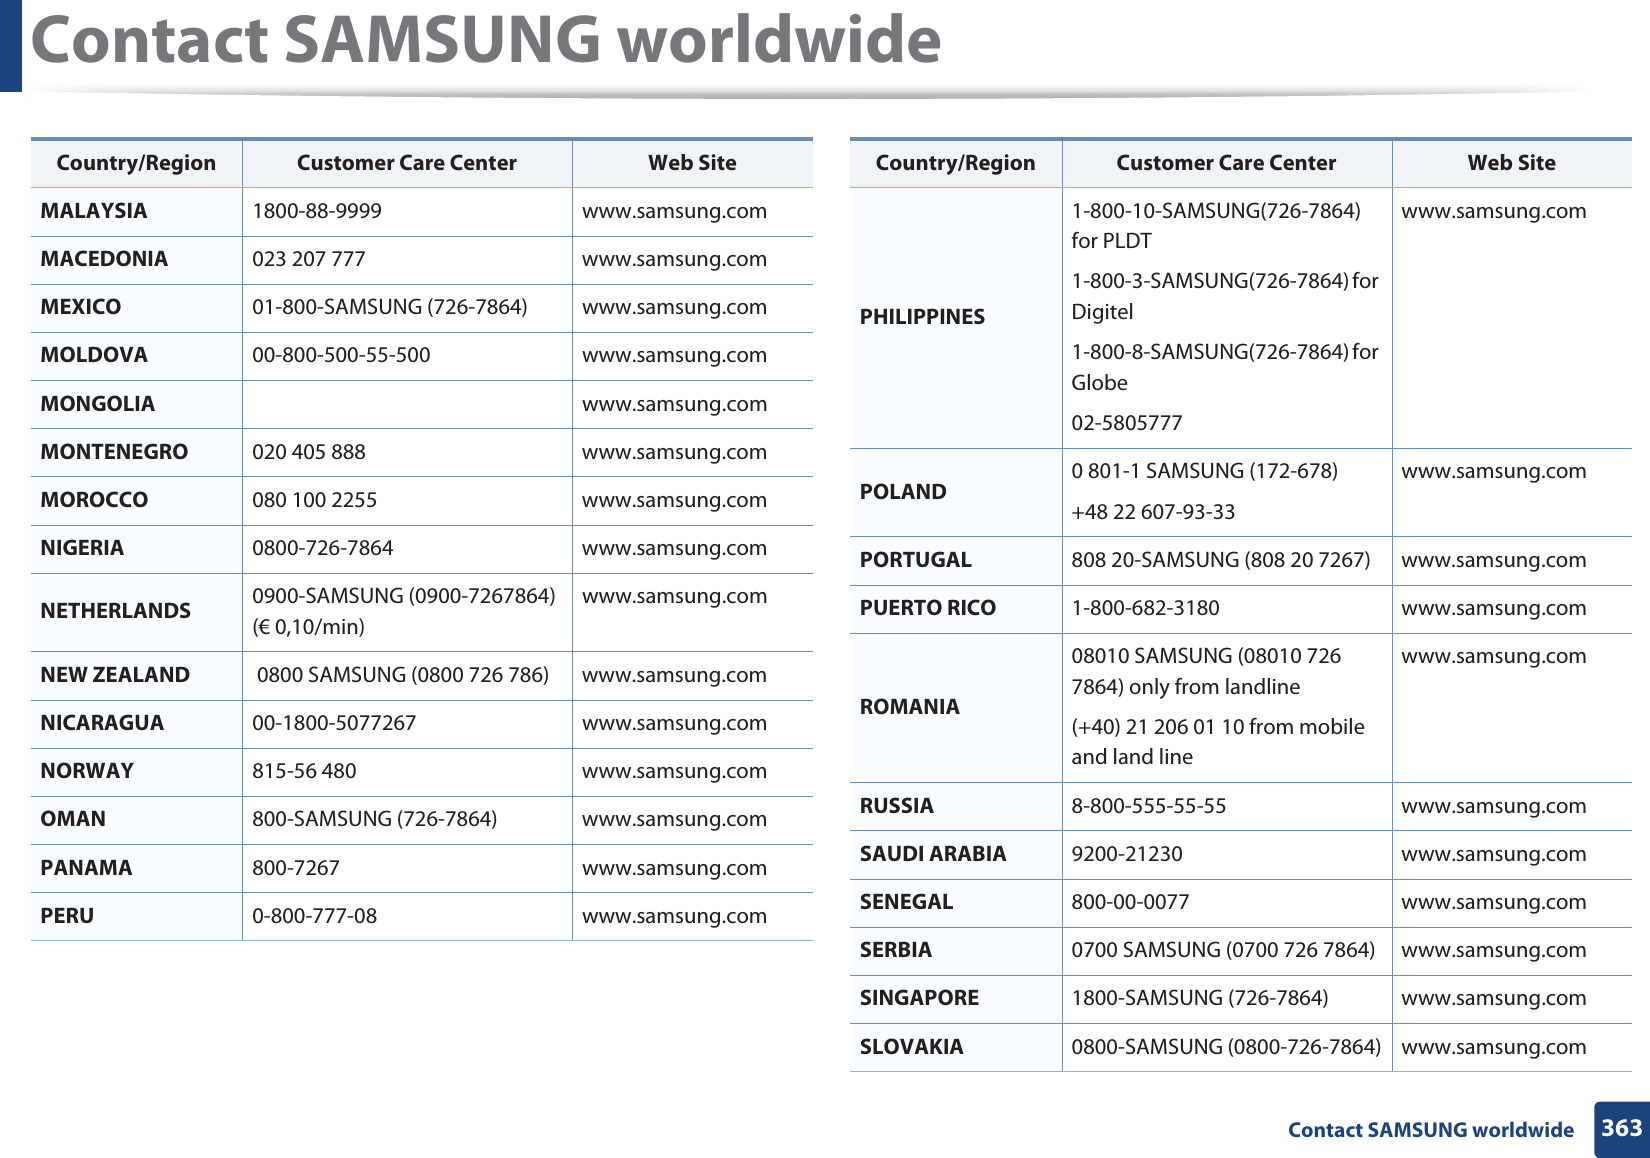 Contact SAMSUNG worldwide363 Contact SAMSUNG worldwideMALAYSIA 1800-88-9999 www.samsung.comMACEDONIA 023 207 777 www.samsung.comMEXICO 01-800-SAMSUNG (726-7864) www.samsung.comMOLDOVA 00-800-500-55-500 www.samsung.comMONGOLIA www.samsung.comMONTENEGRO 020 405 888 www.samsung.comMOROCCO 080 100 2255 www.samsung.comNIGERIA 0800-726-7864 www.samsung.comNETHERLANDS 0900-SAMSUNG (0900-7267864) (€ 0,10/min)www.samsung.comNEW ZEALAND  0800 SAMSUNG (0800 726 786) www.samsung.comNICARAGUA 00-1800-5077267 www.samsung.comNORWAY 815-56 480 www.samsung.comOMAN 800-SAMSUNG (726-7864) www.samsung.comPANAMA 800-7267 www.samsung.comPERU 0-800-777-08 www.samsung.comCountry/Region Customer Care Center  Web SitePHILIPPINES1-800-10-SAMSUNG(726-7864) for PLDT1-800-3-SAMSUNG(726-7864) for Digitel1-800-8-SAMSUNG(726-7864) for Globe02-5805777www.samsung.comPOLAND 0 801-1 SAMSUNG (172-678)+48 22 607-93-33www.samsung.comPORTUGAL 808 20-SAMSUNG (808 20 7267) www.samsung.comPUERTO RICO 1-800-682-3180 www.samsung.comROMANIA08010 SAMSUNG (08010 726 7864) only from landline(+40) 21 206 01 10 from mobile and land linewww.samsung.comRUSSIA 8-800-555-55-55 www.samsung.comSAUDI ARABIA 9200-21230 www.samsung.comSENEGAL 800-00-0077 www.samsung.comSERBIA 0700 SAMSUNG (0700 726 7864) www.samsung.comSINGAPORE 1800-SAMSUNG (726-7864) www.samsung.comSLOVAKIA 0800-SAMSUNG (0800-726-7864) www.samsung.comCountry/Region Customer Care Center  Web Site